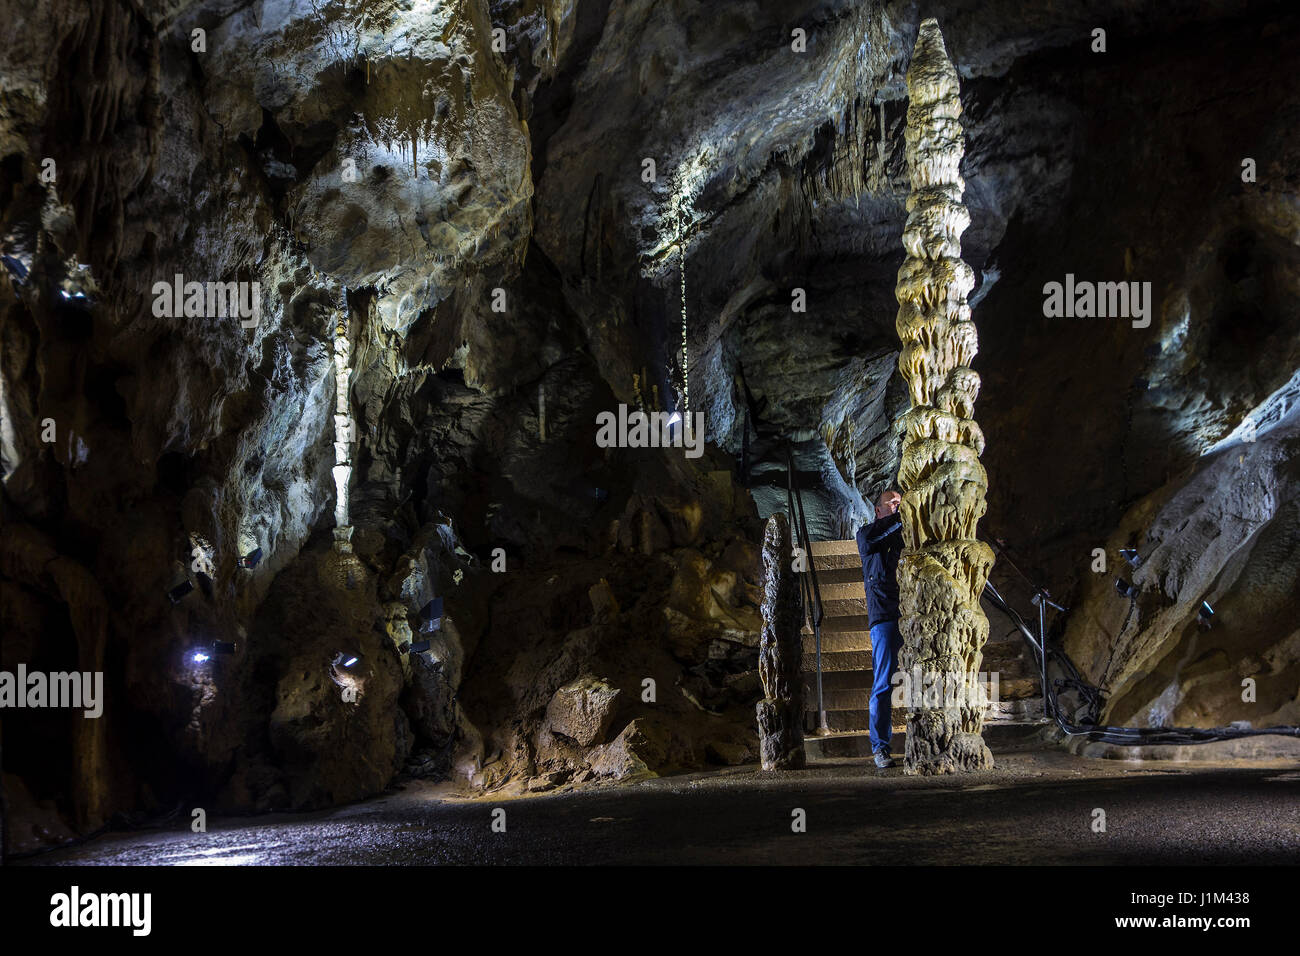 Tourist looking at big stalagmite in the Caves of Han-sur-Lesse / Grottes de Han, Belgian Ardennes, Belgium Stock Photo